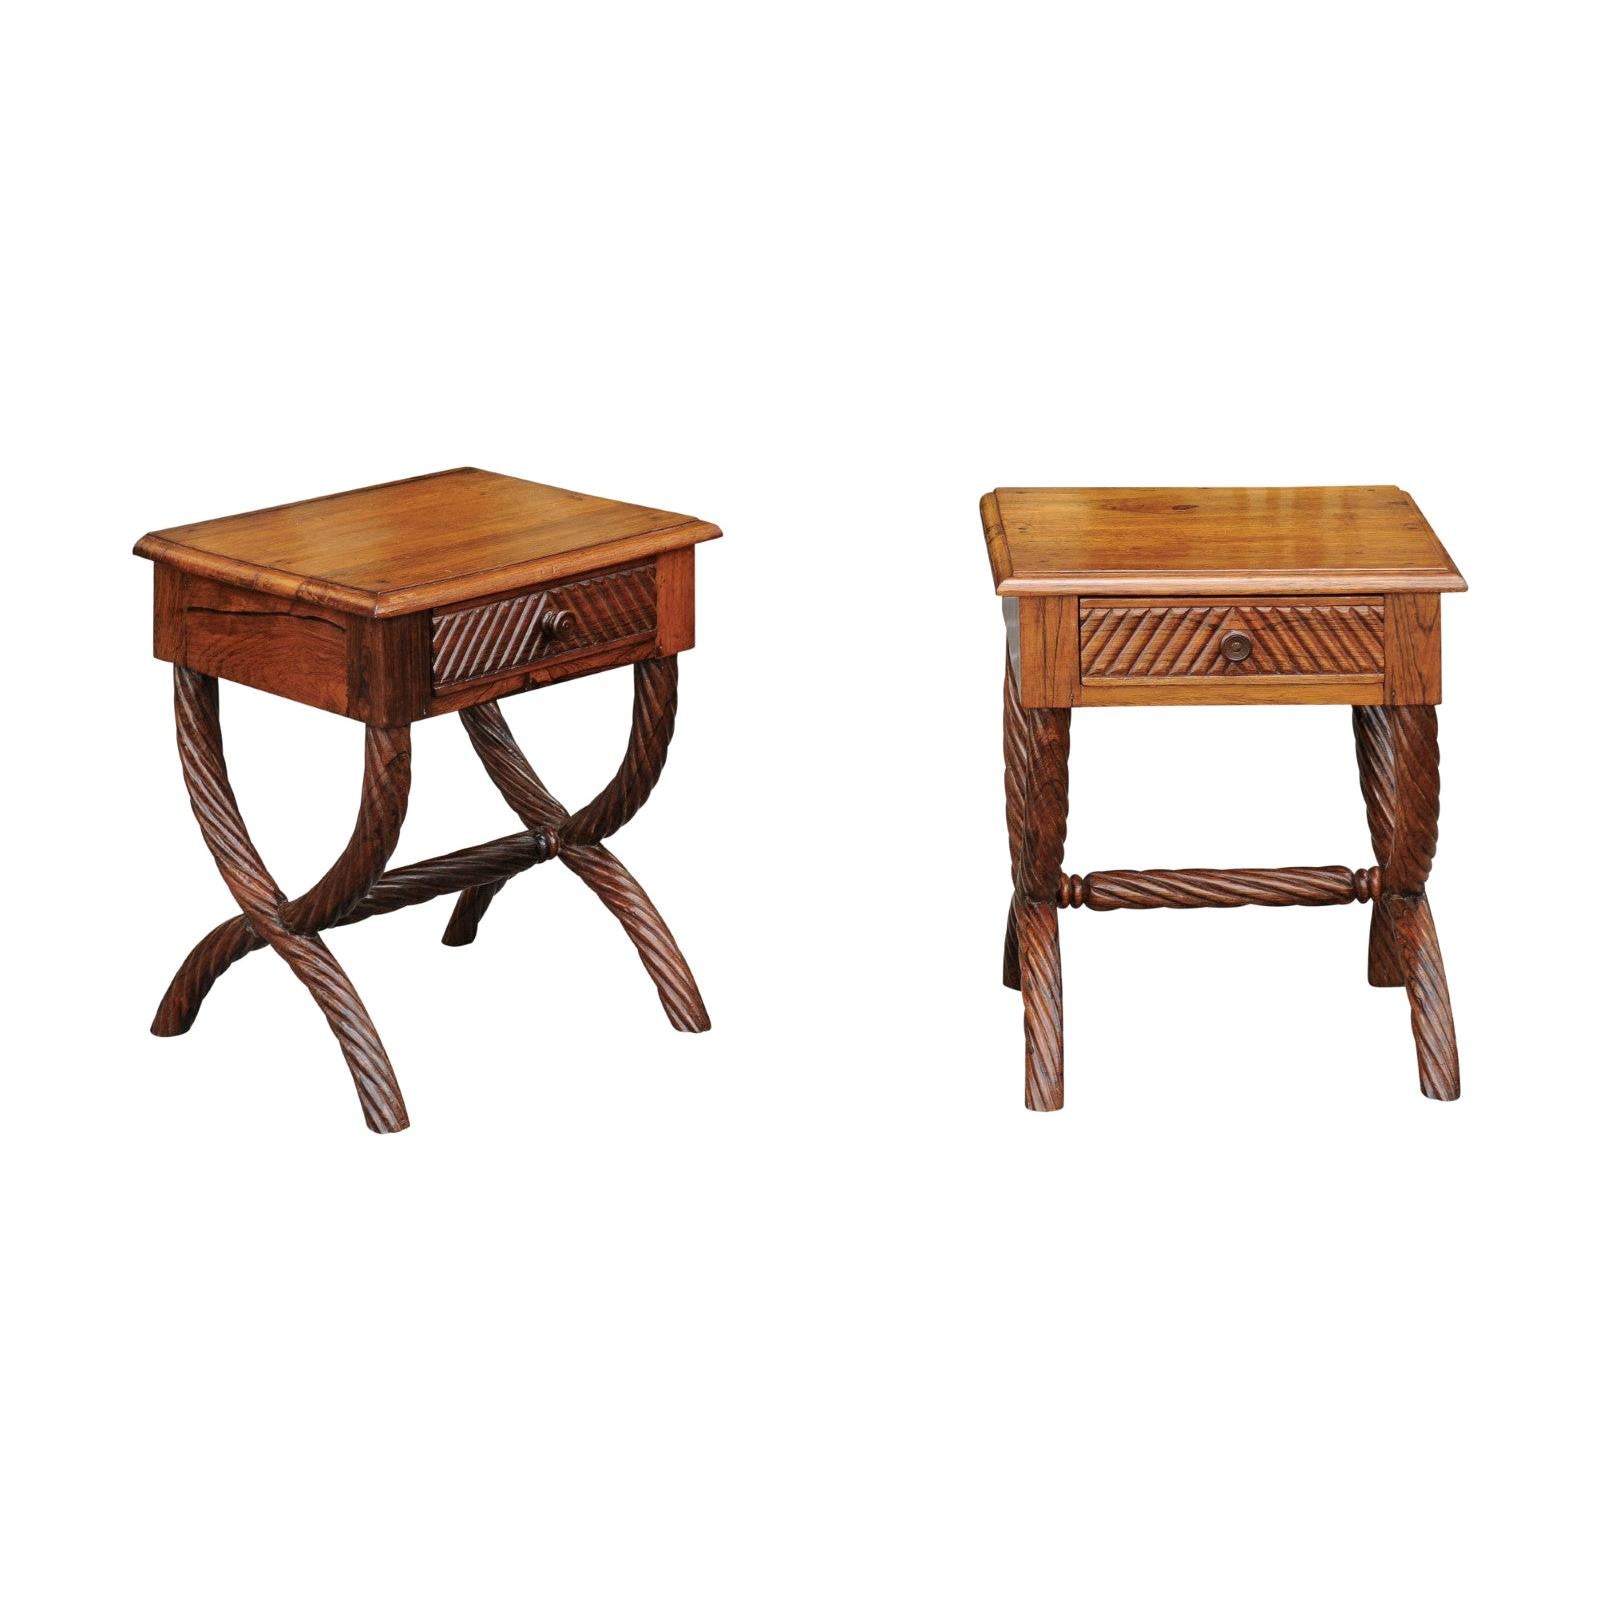 Pair of 1900s Anglo-Indian Low Side Tables with Curule Bases and Twisted Accents